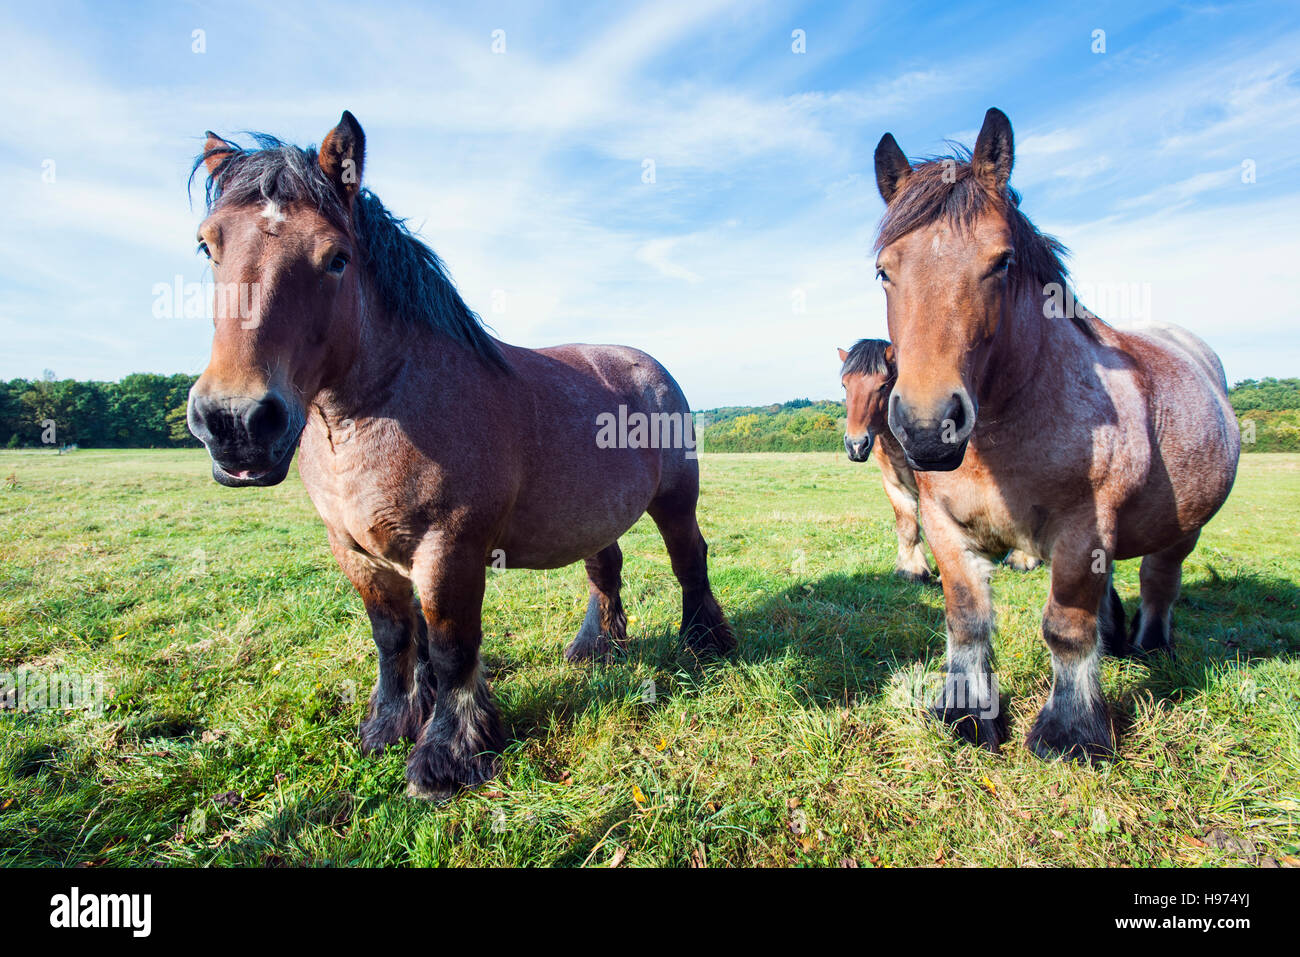 The Ardennes or Ardennais horses in a field in the Ardennes region of Belgium. Stock Photo